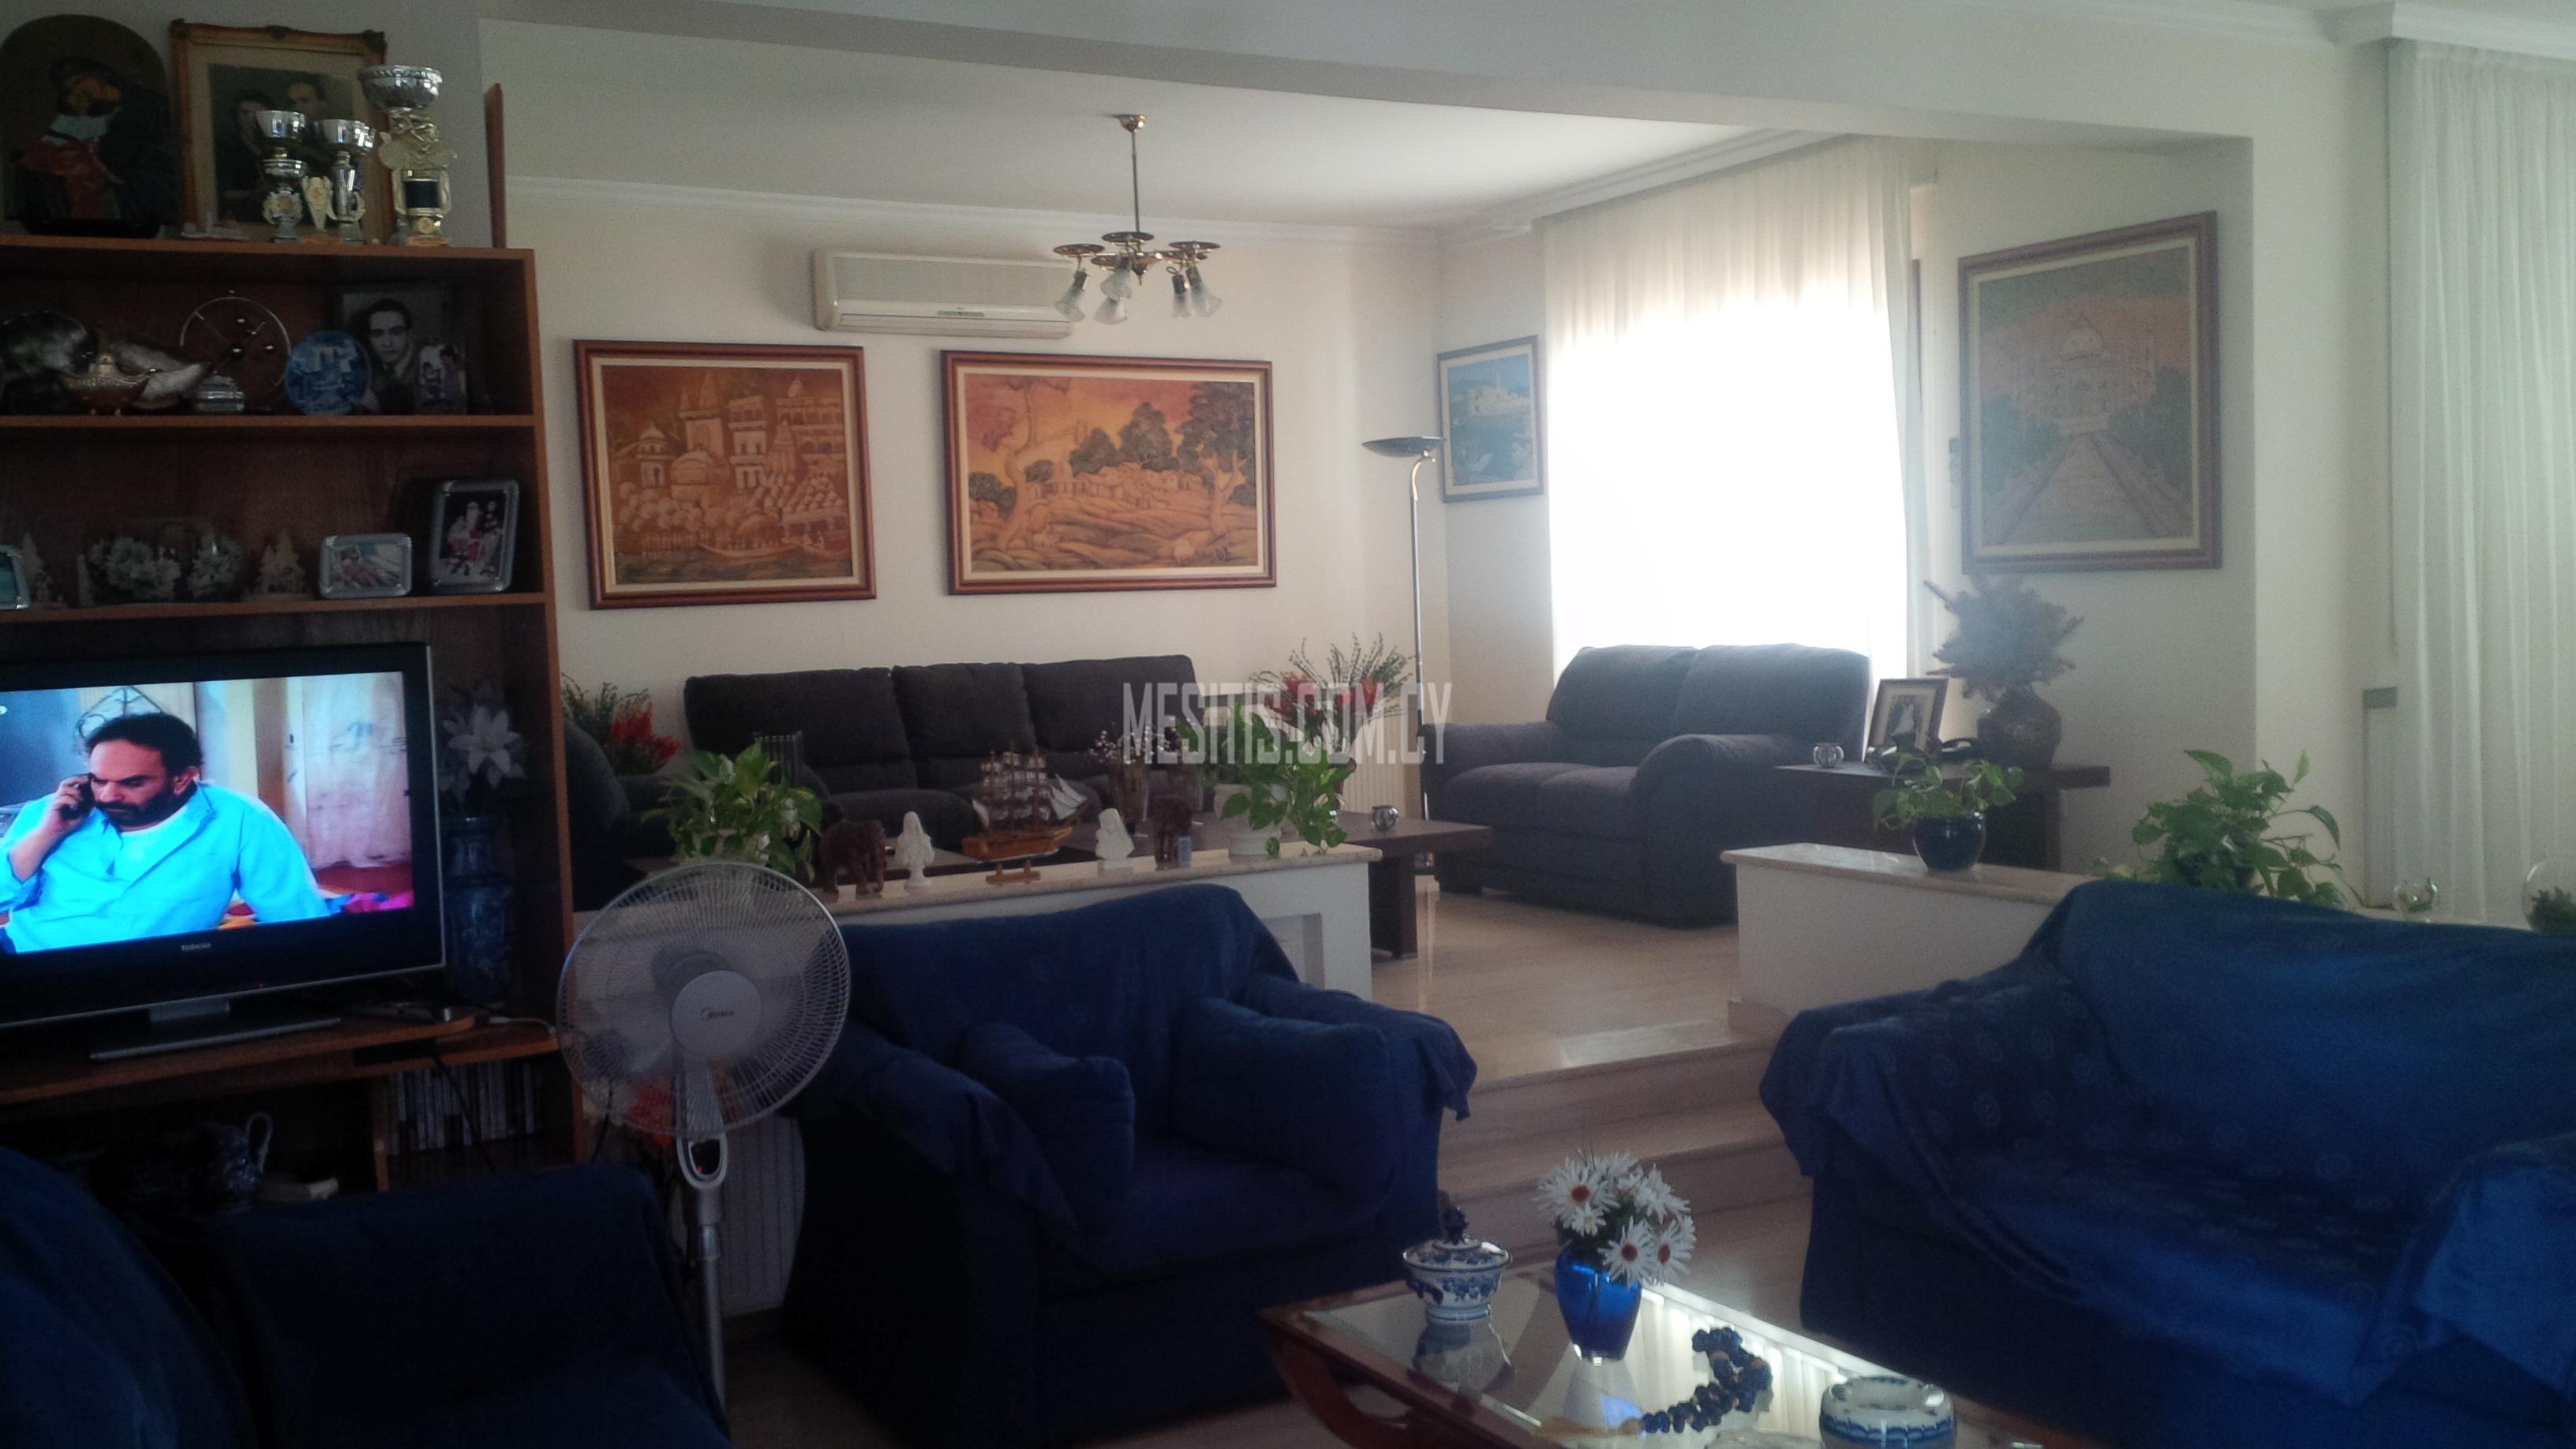 4 Bedroom Luxury House For Rent Or For Sale In Aglantzia With Attic Separate Office Room And Big Yard #1378-0